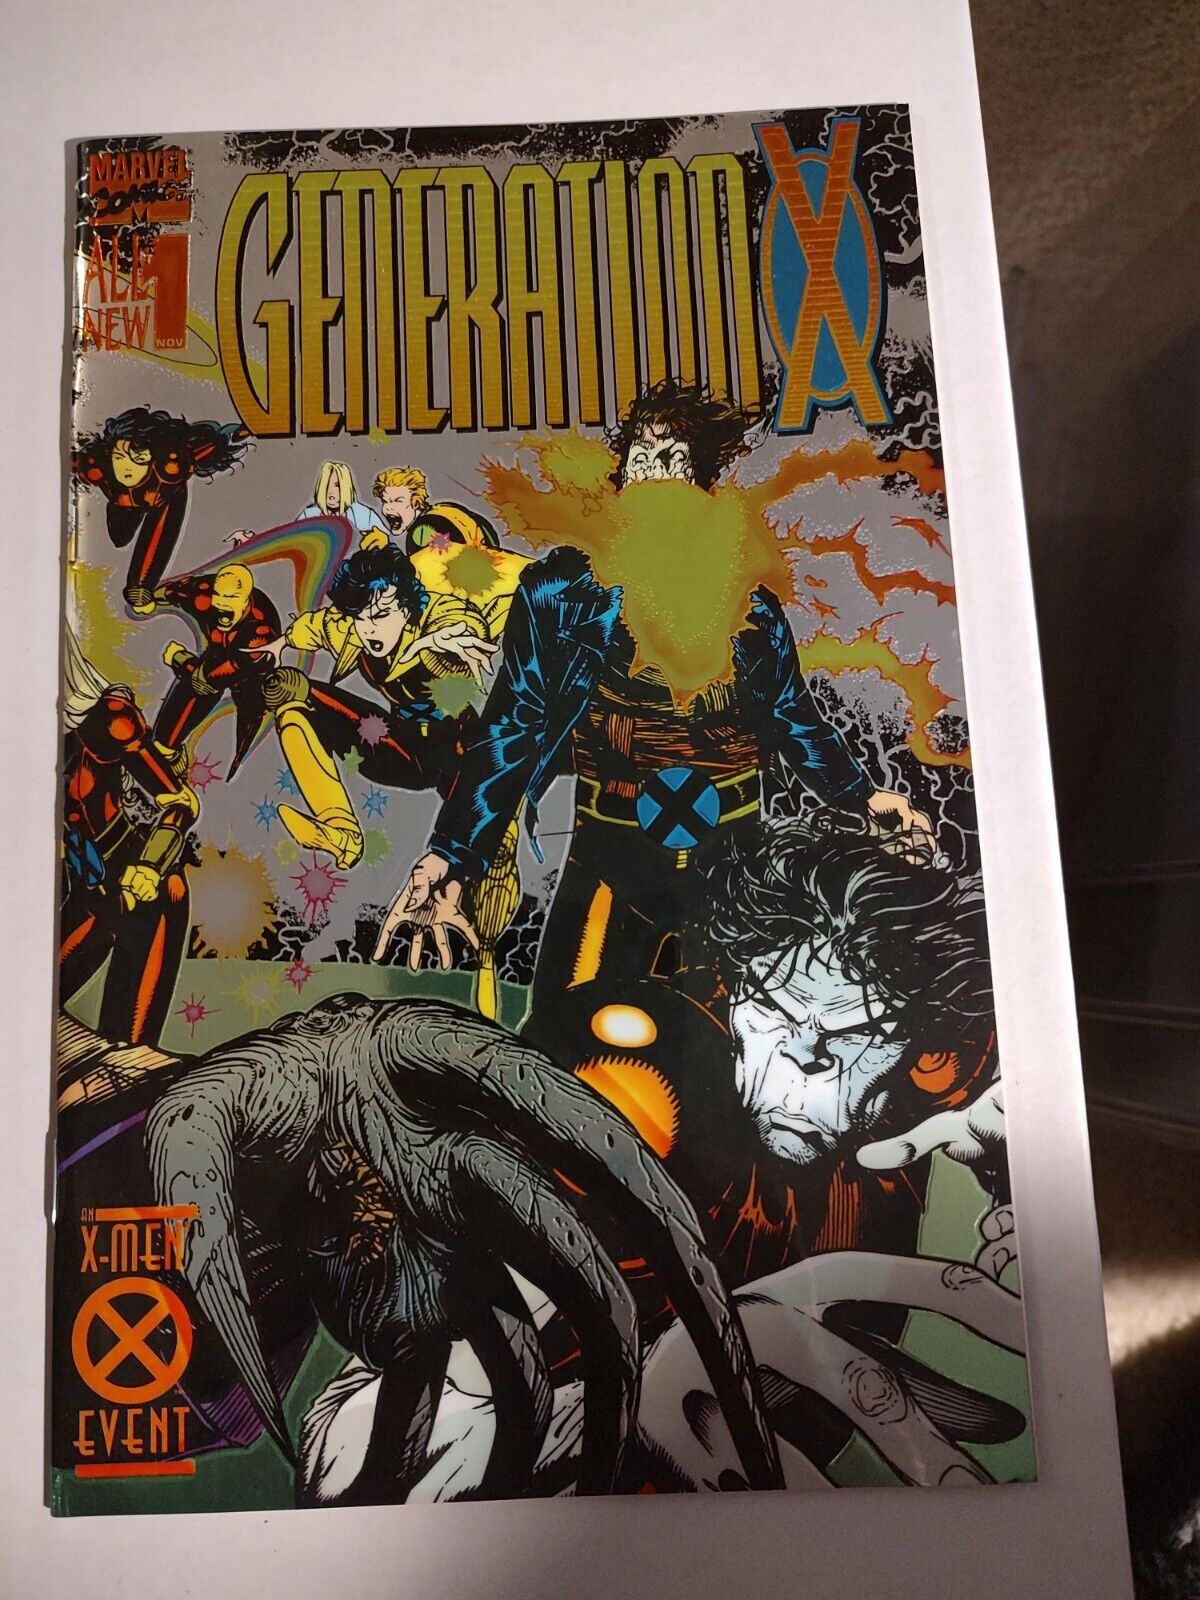 Generation X # 1 (1994) Newsstand. Wrap around cover. Original Owner and Unread.